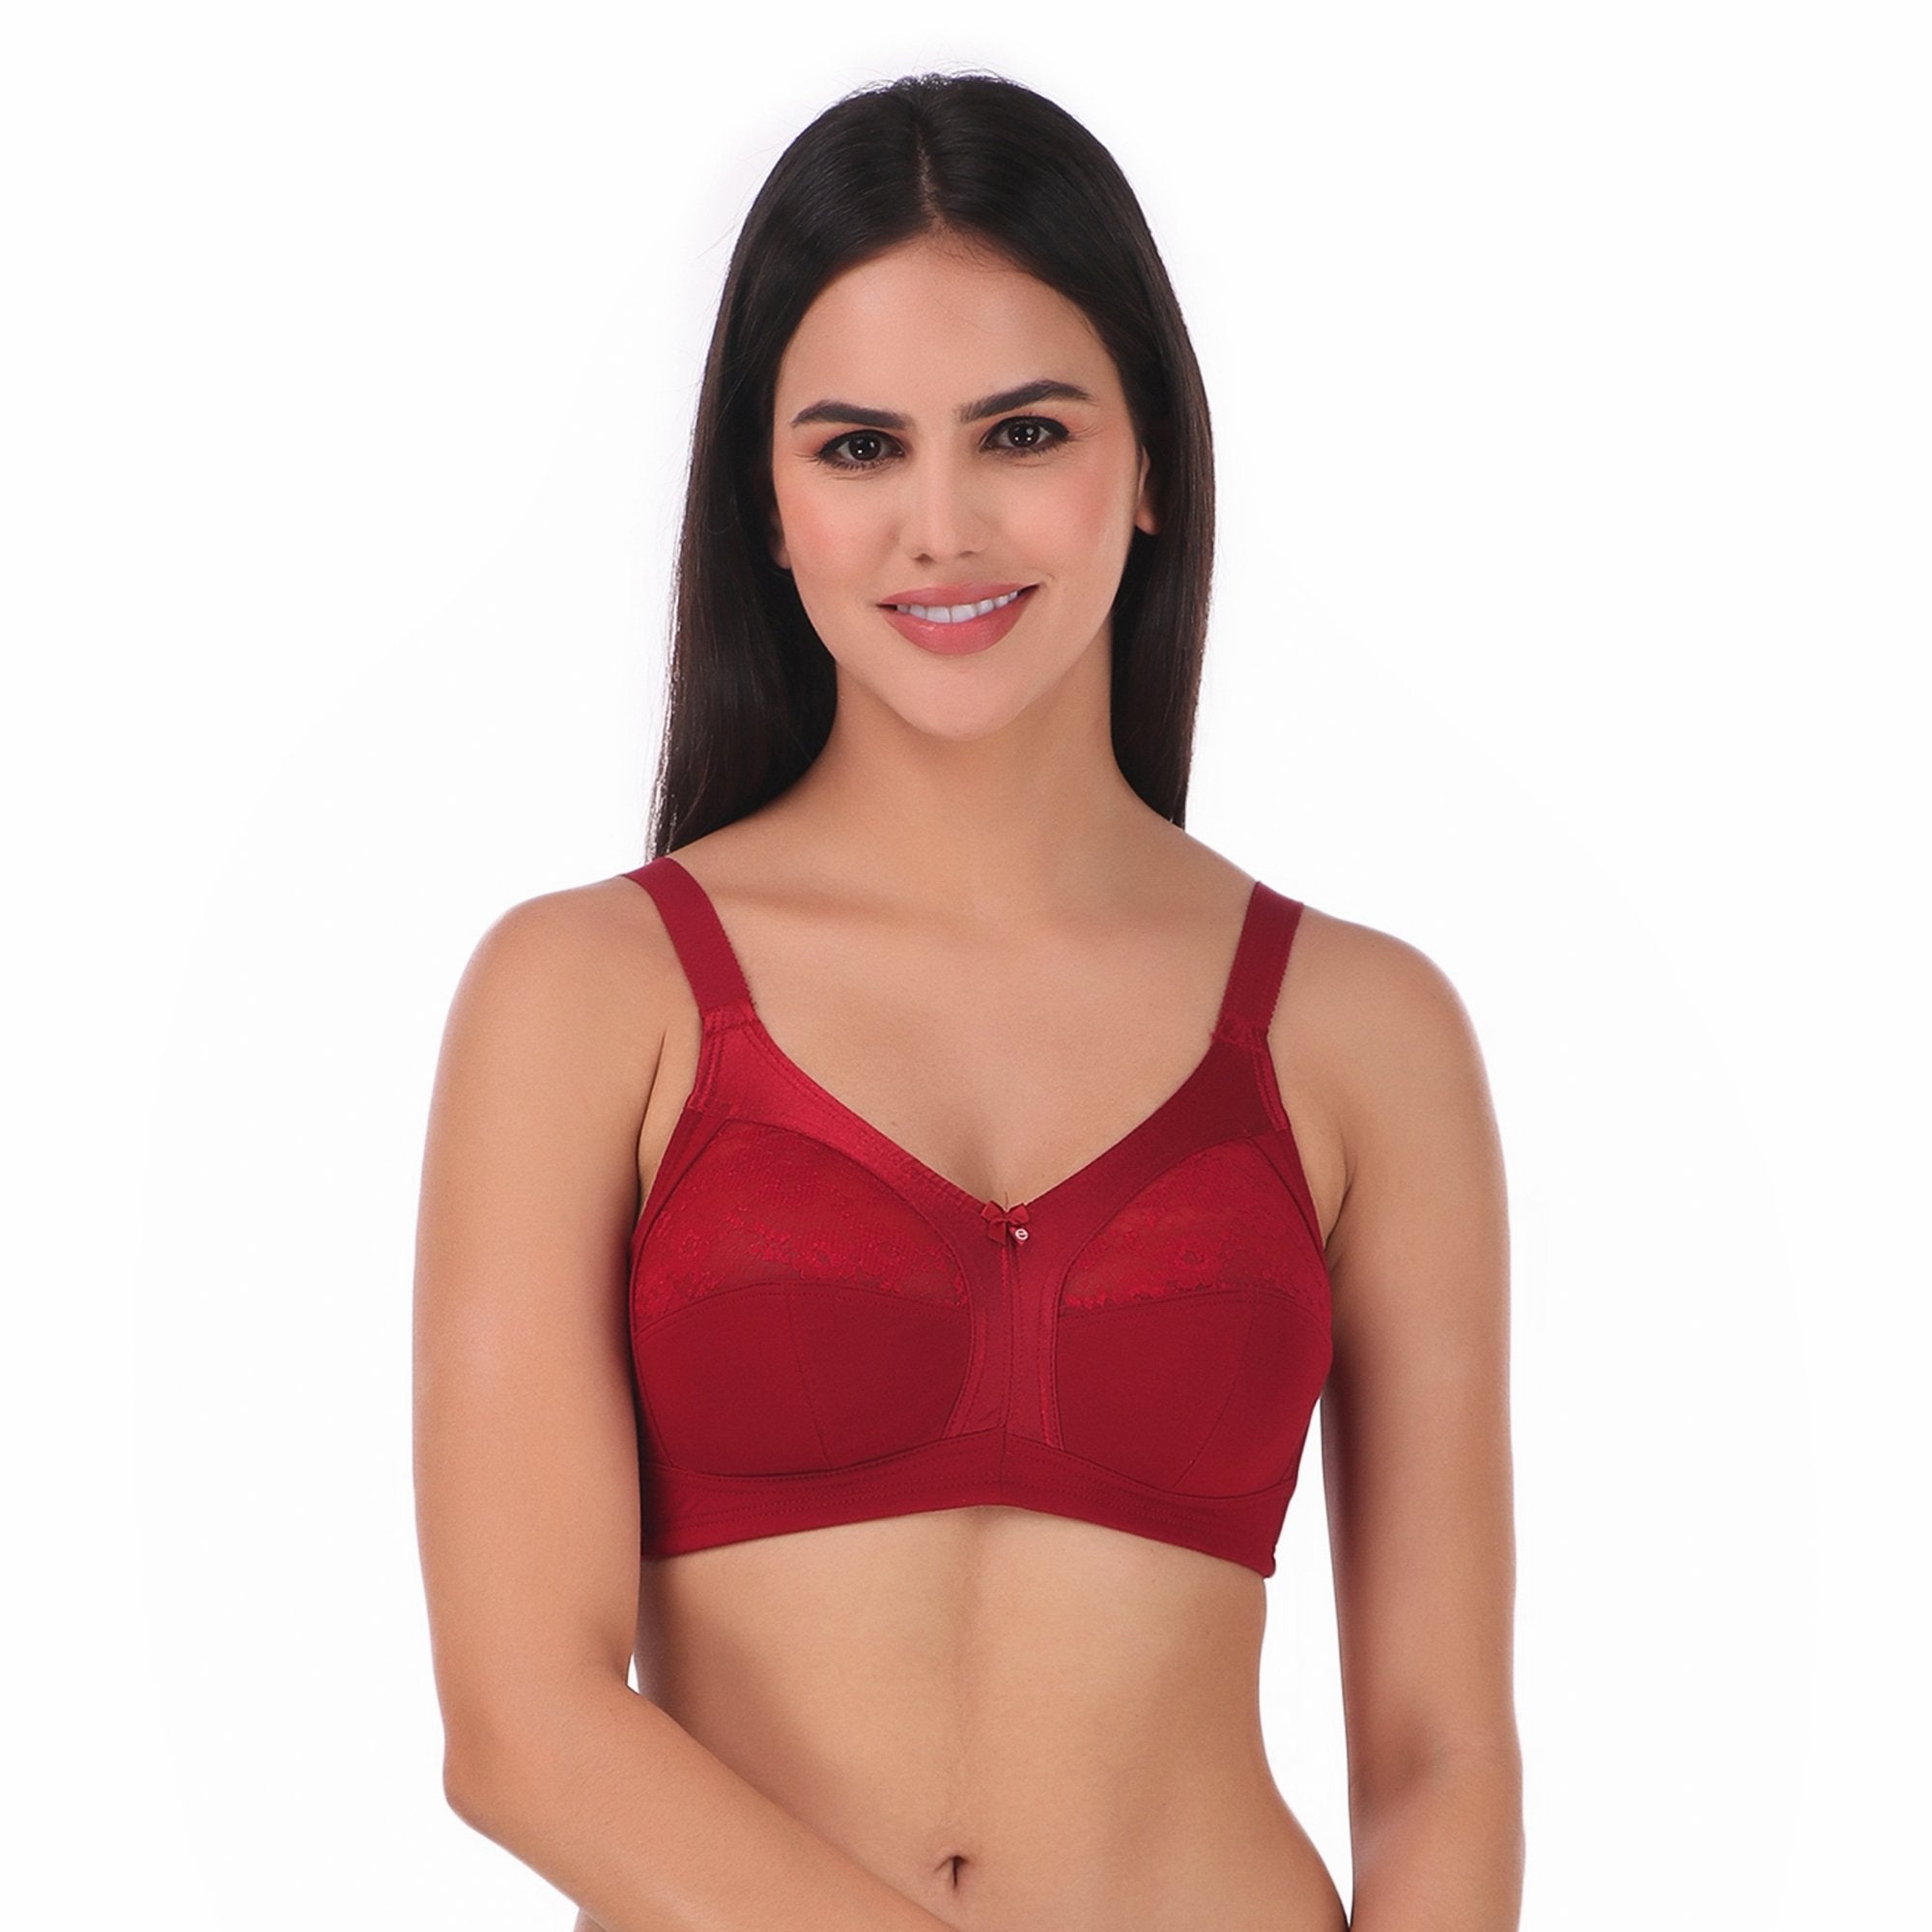 Enamor A014 Full Support Cotton Bra - M-Frame High Coverage Non